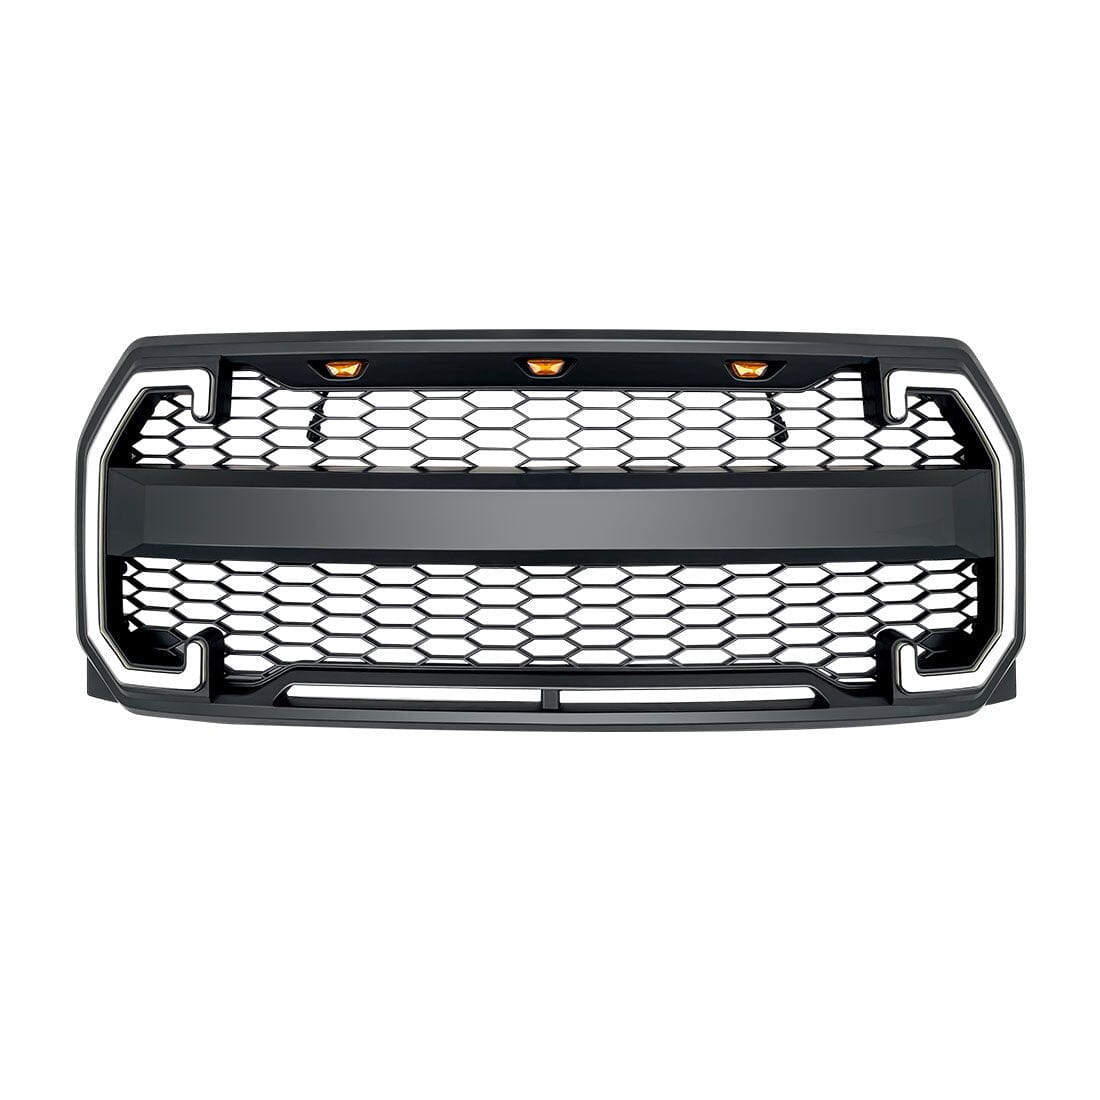 Raptor Style Mesh Grille W/DRL & Turn Signal Lights For 2015-2017 Ford F150